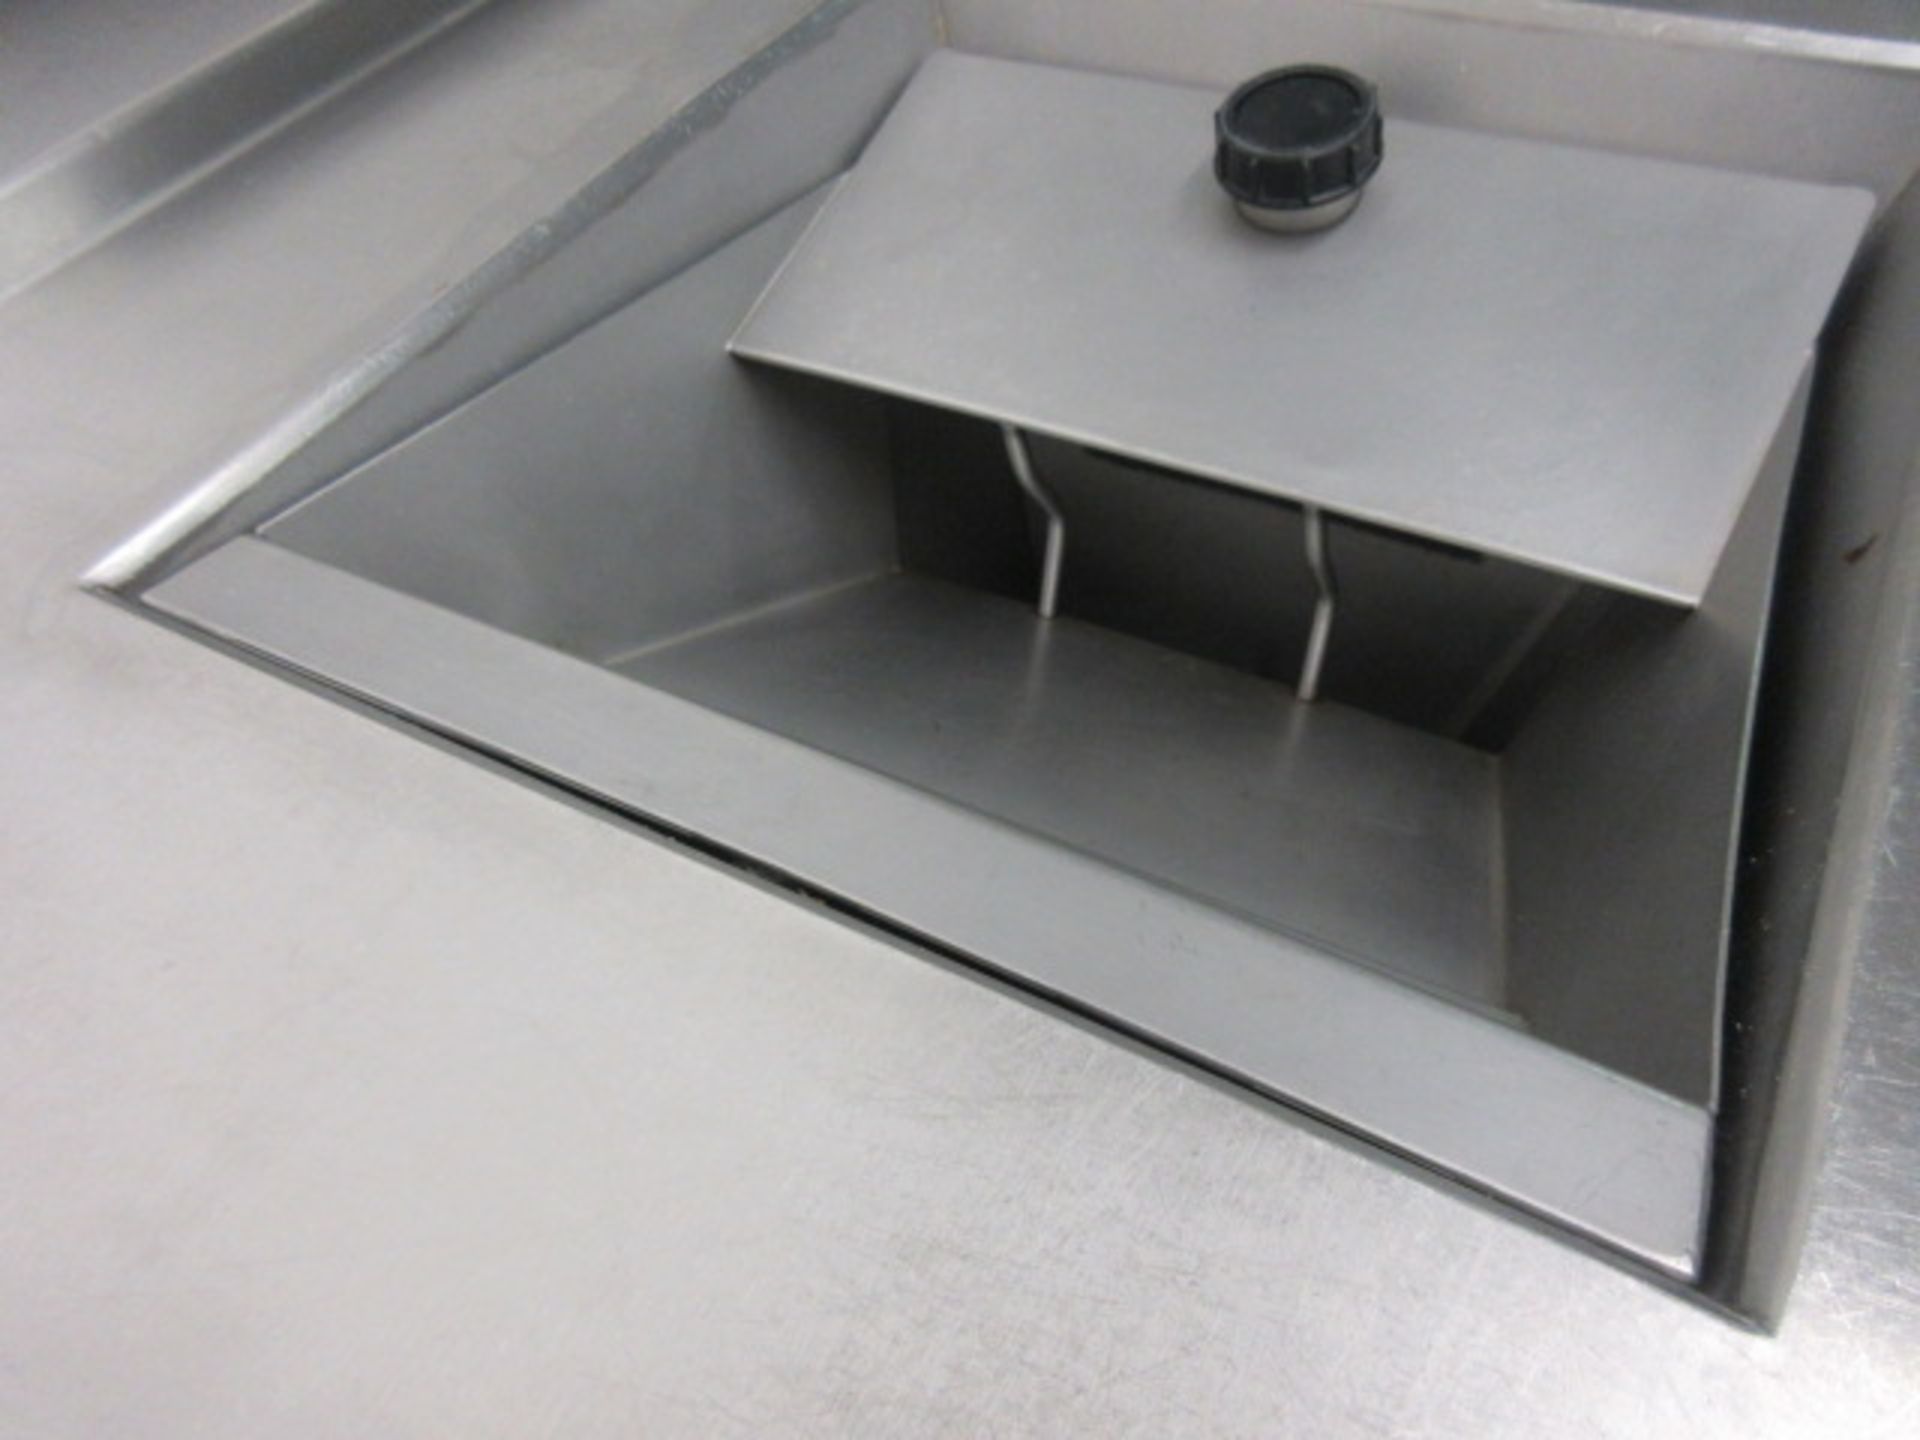 Canteen Wash Down Sink and Waste Disposal Unit Holehouse Road. Gallery canteen. - Image 3 of 4